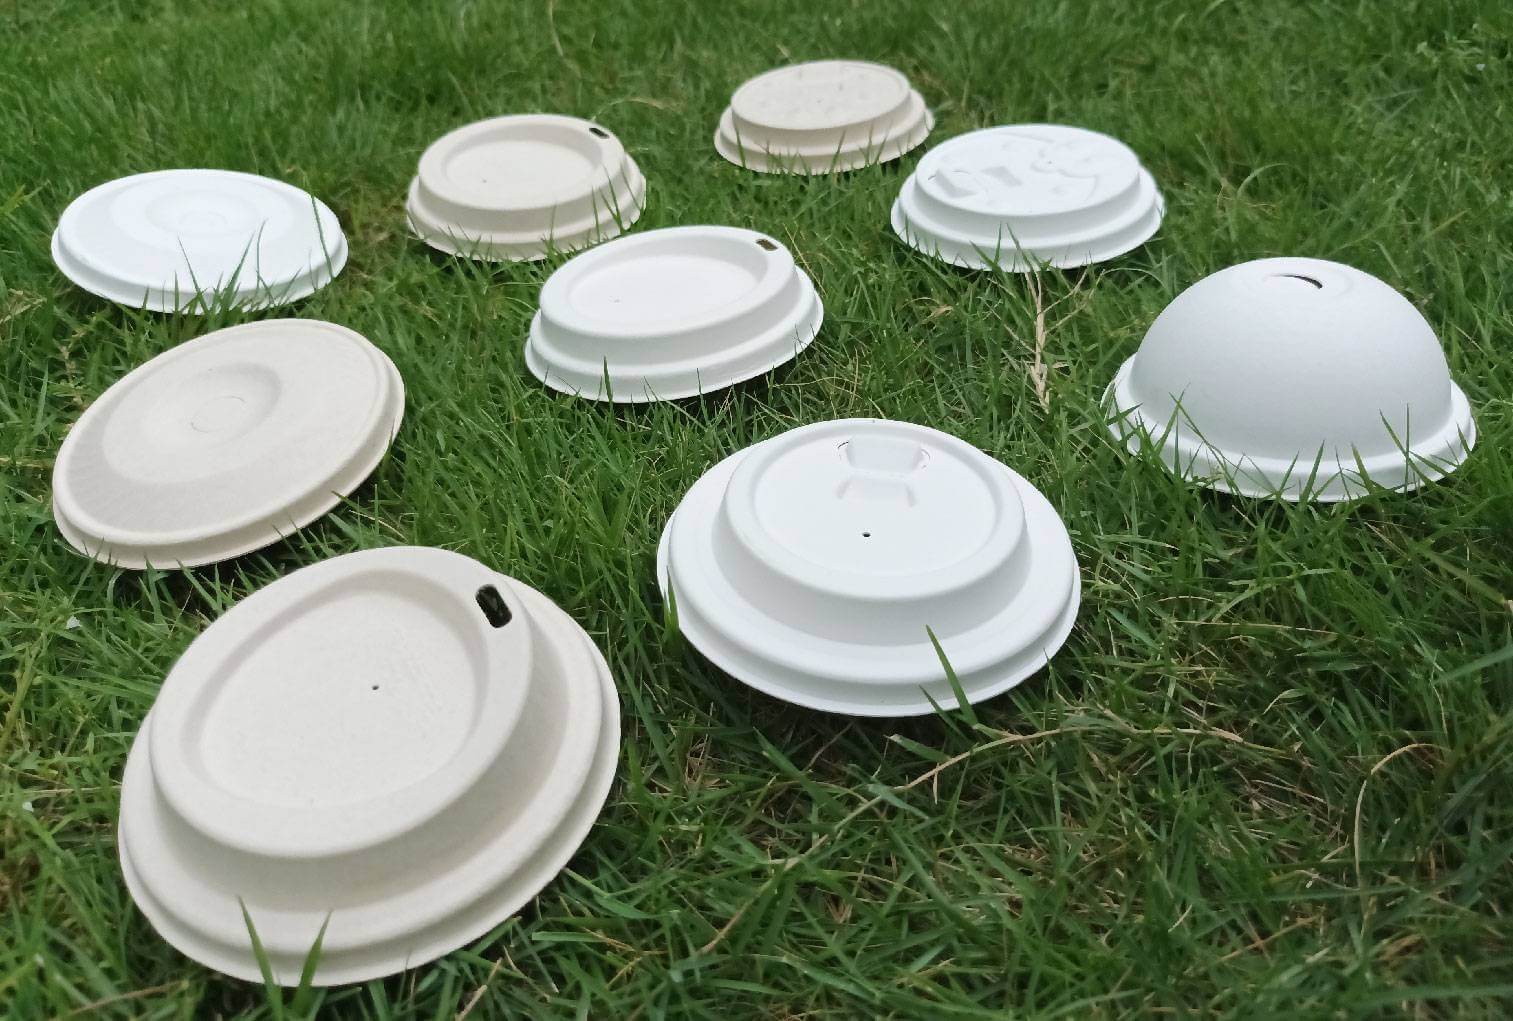 What are the widely customized coffee cup lids recyclable?